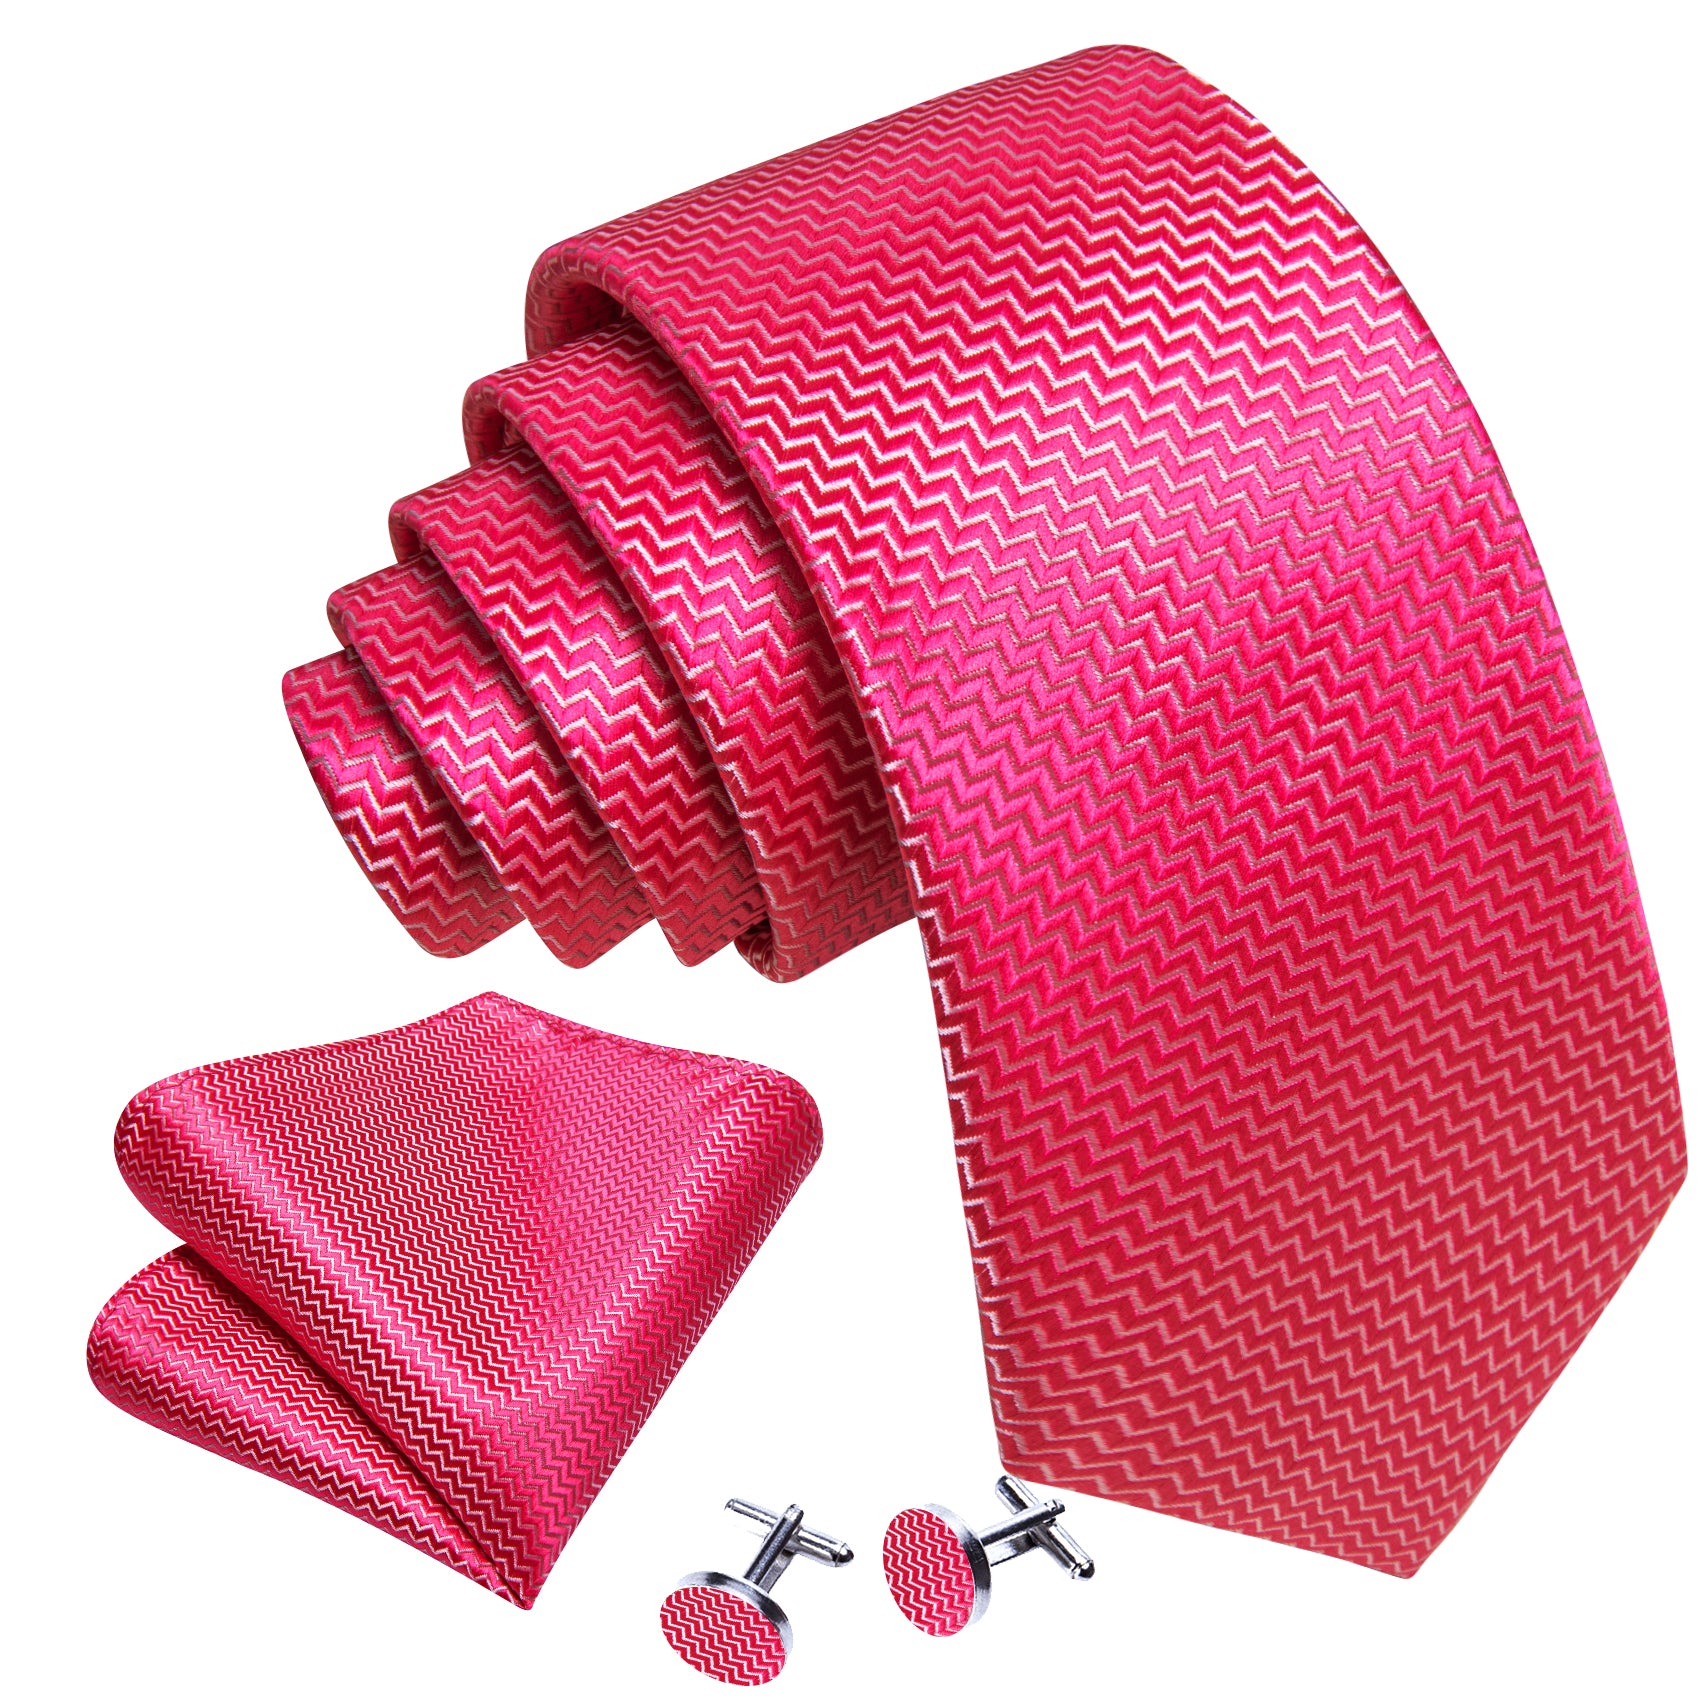 Rose Red Ripple Silk 63 Inches Extra Long Tie Hanky Cufflinks Set